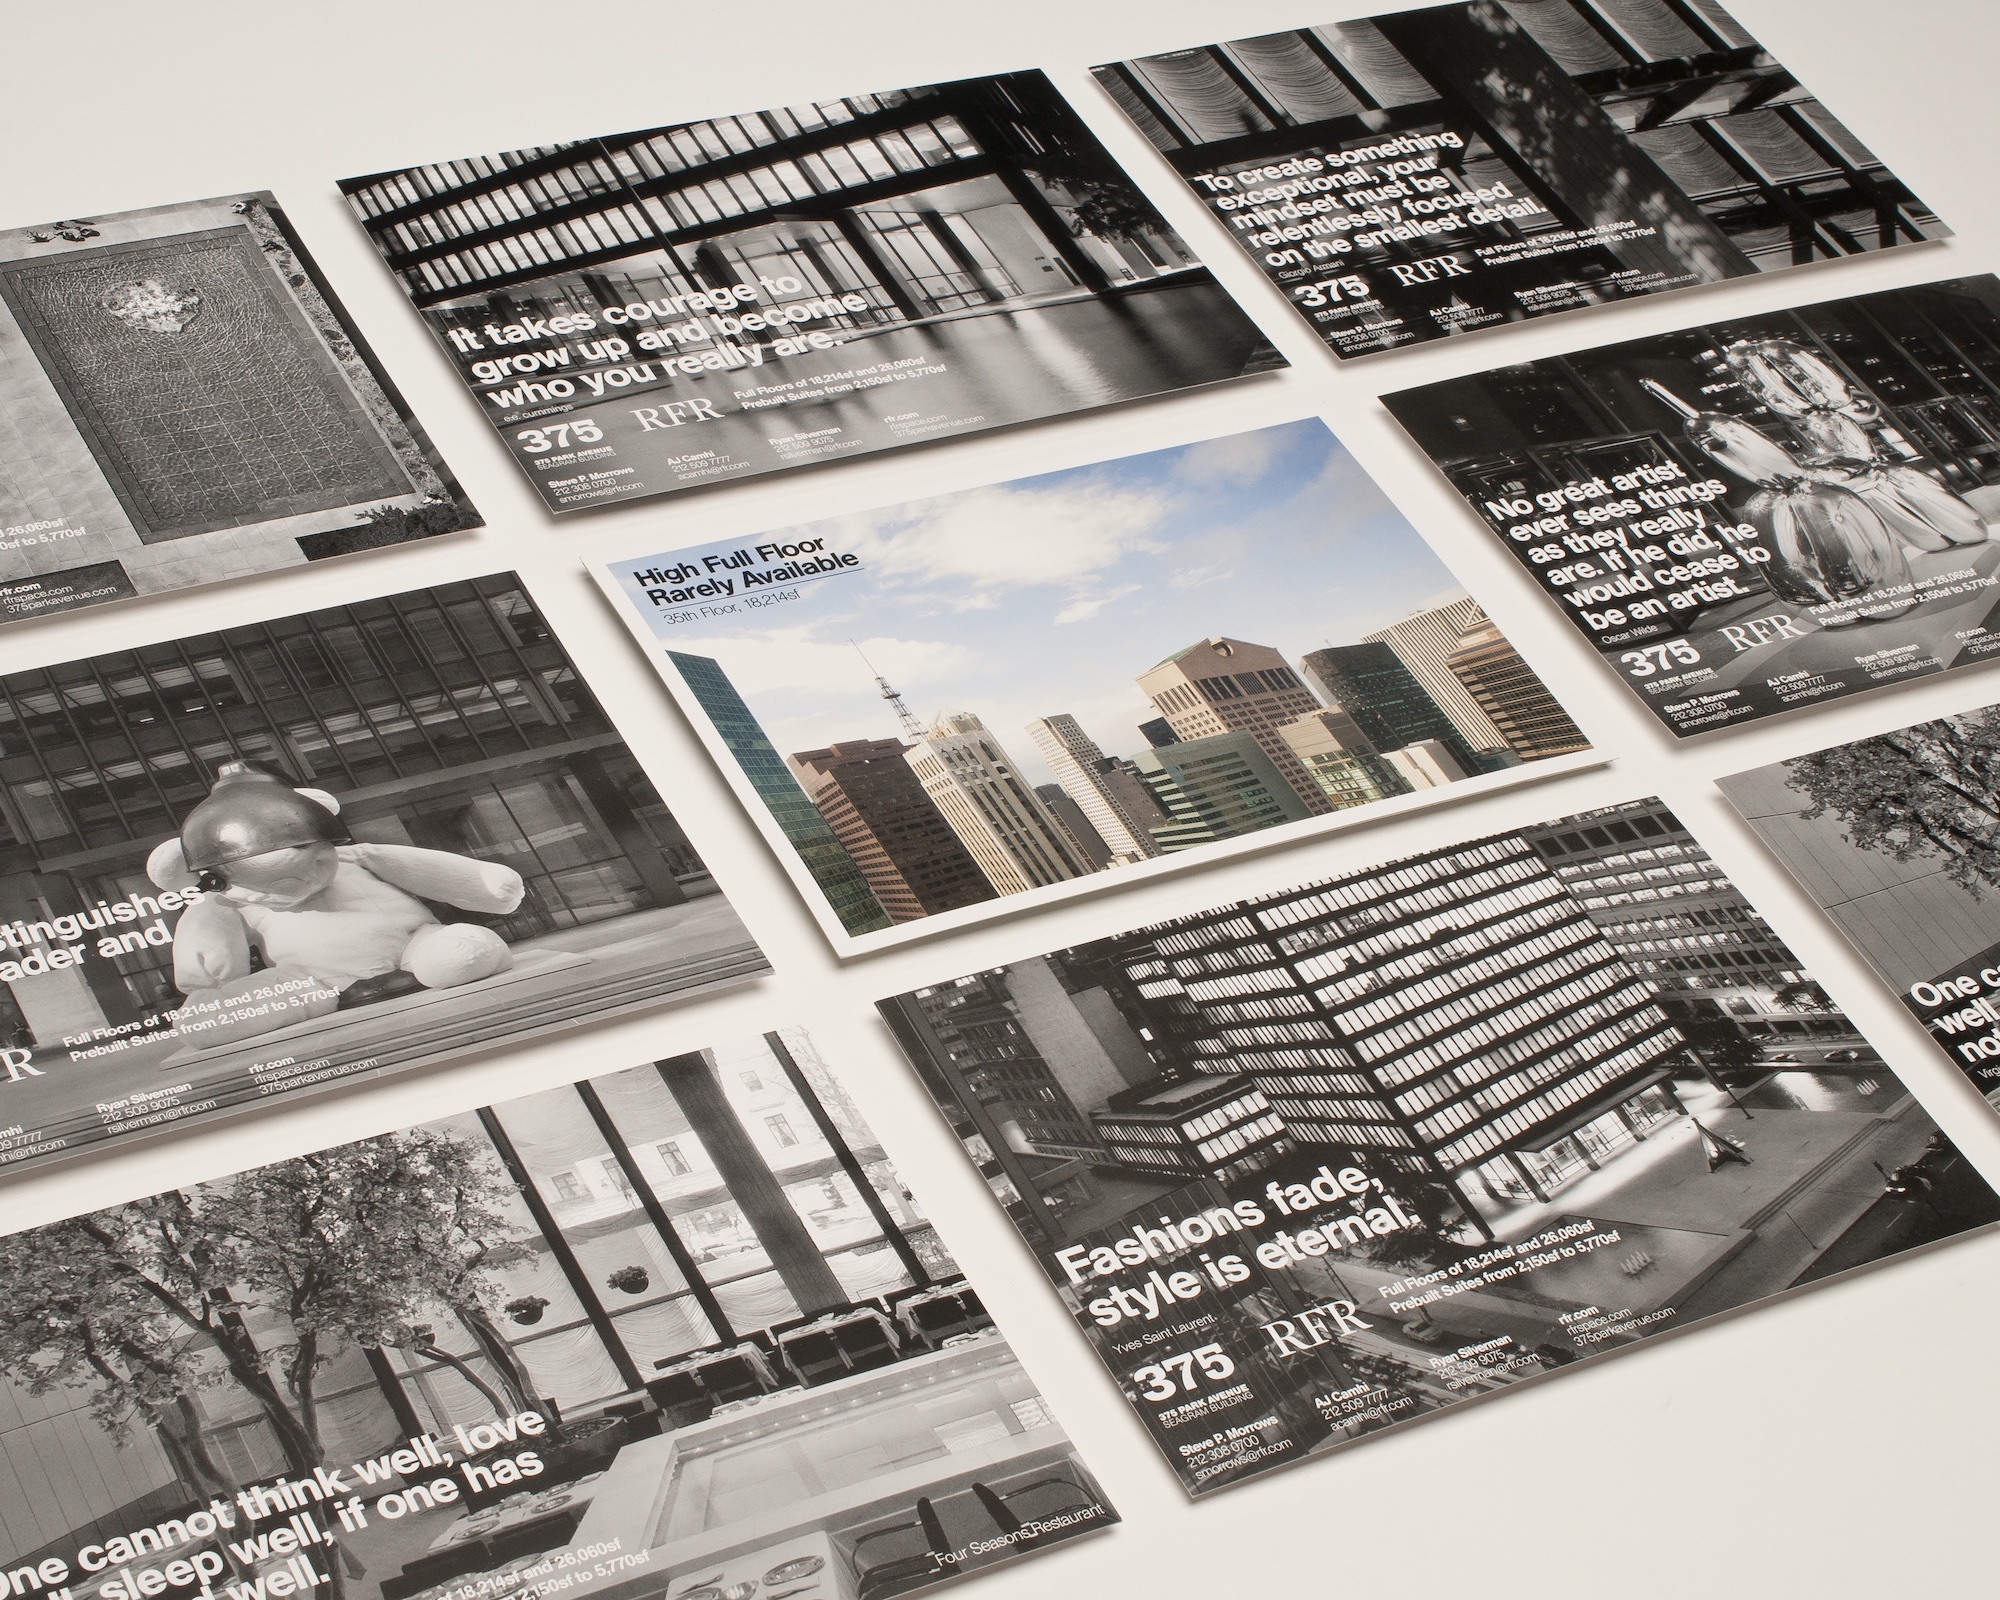 Print collateral for the Seagram Building